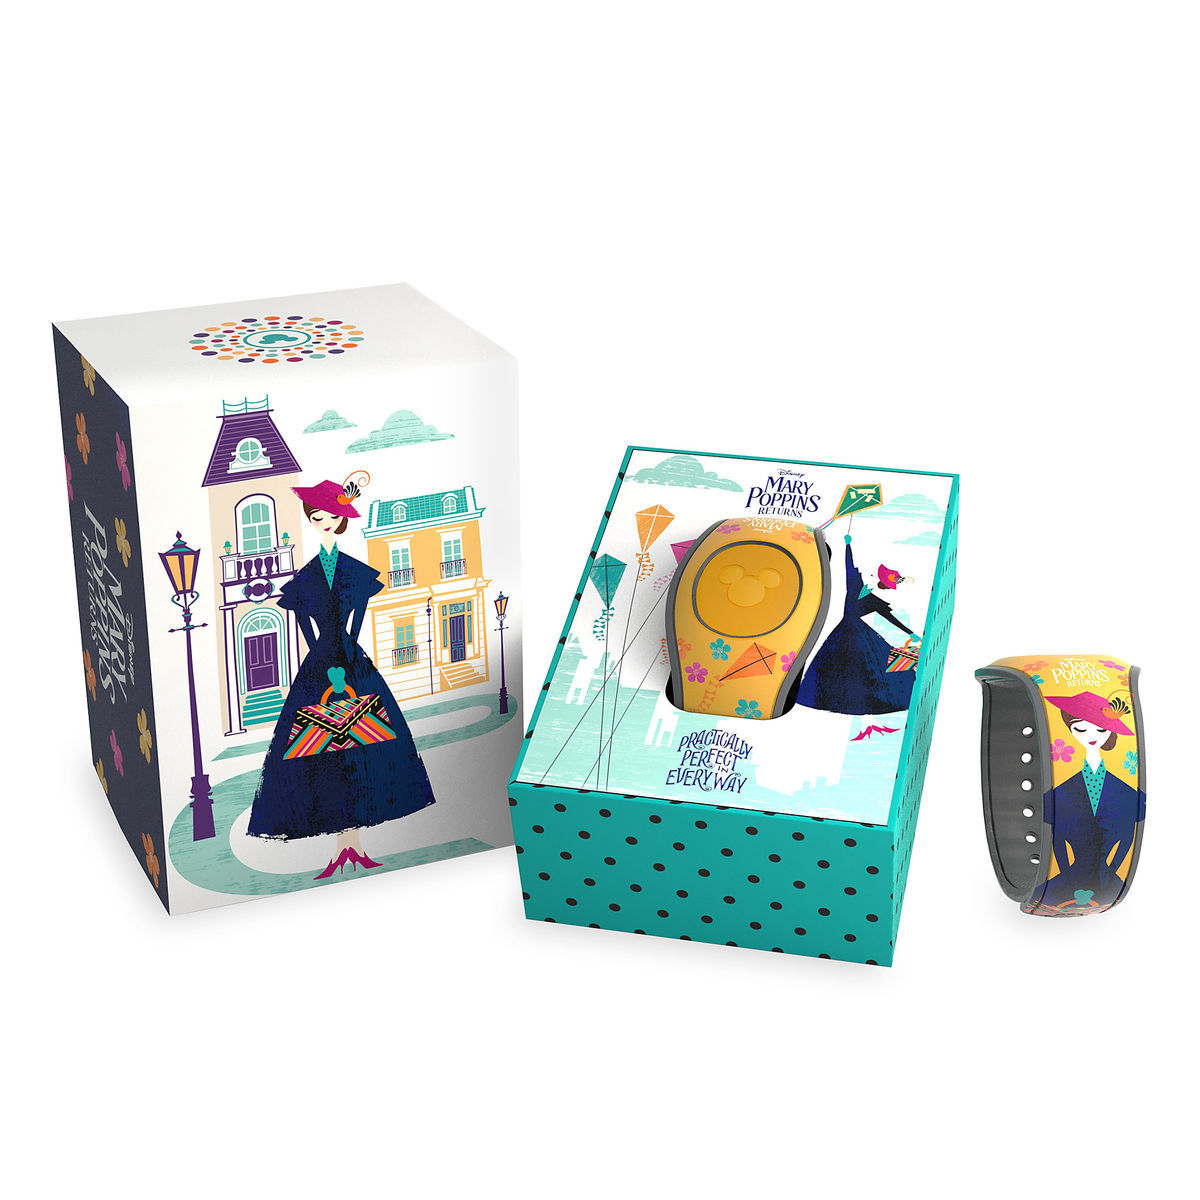 Mary Poppins Returns MagicBand